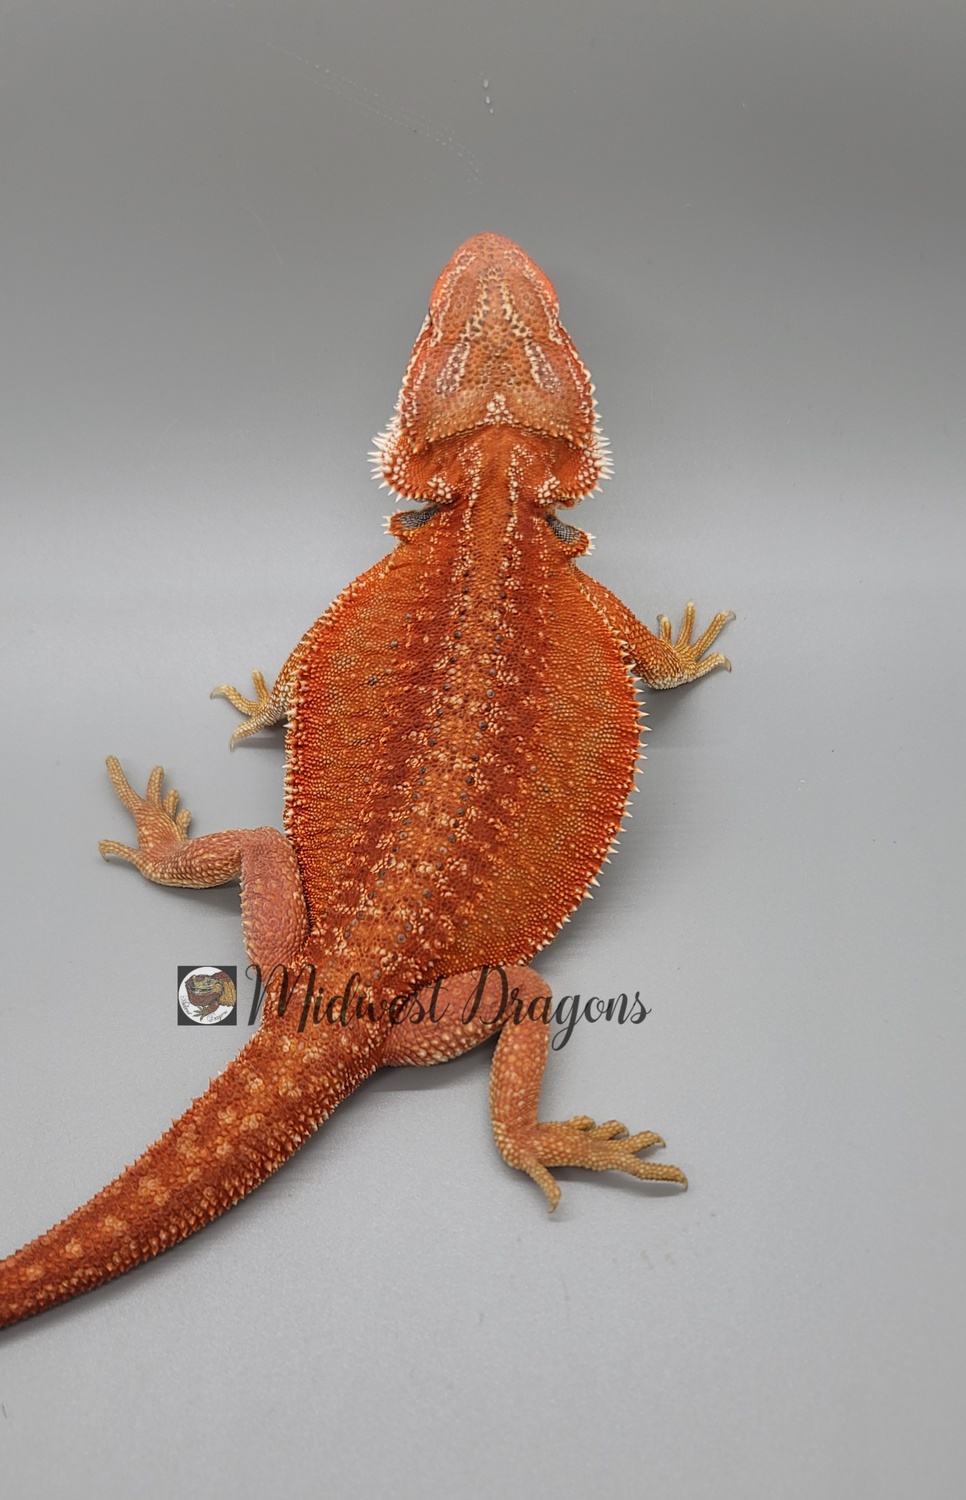 Red Hypo Leatherback Dunner Female Pht Central Bearded Dragon by Midwest Dragons